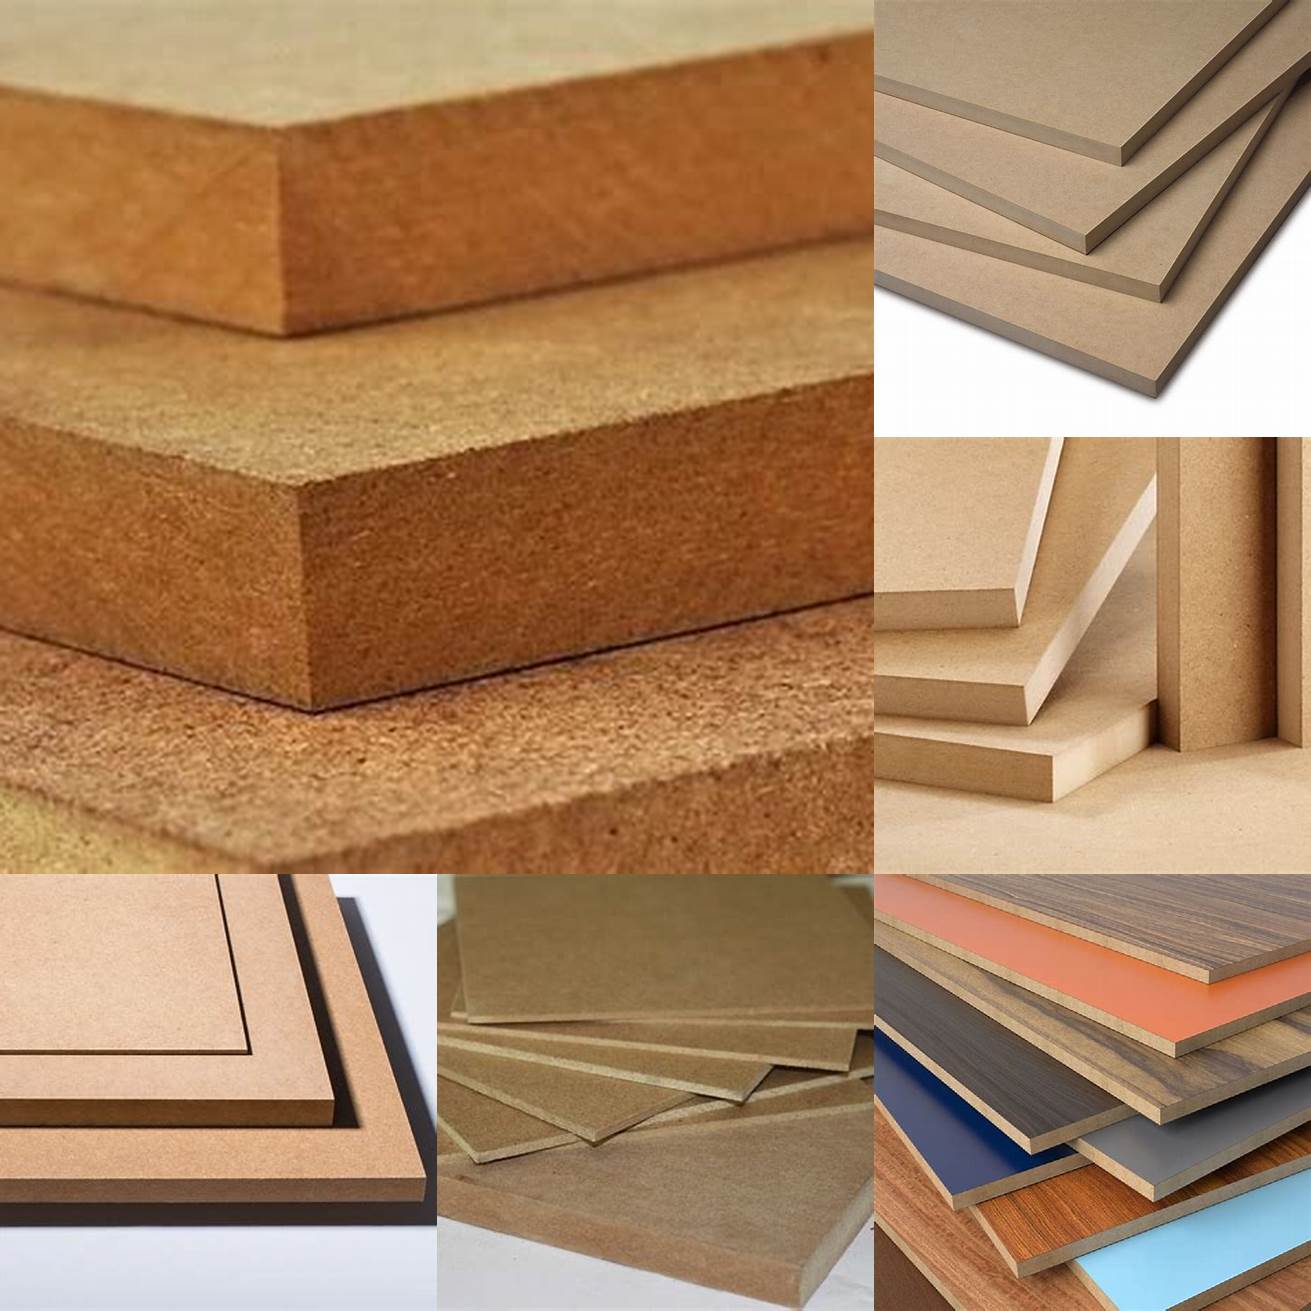 MDF Medium-density fiberboard MDF is a cheaper alternative to solid wood and can be painted or laminated to create a variety of styles